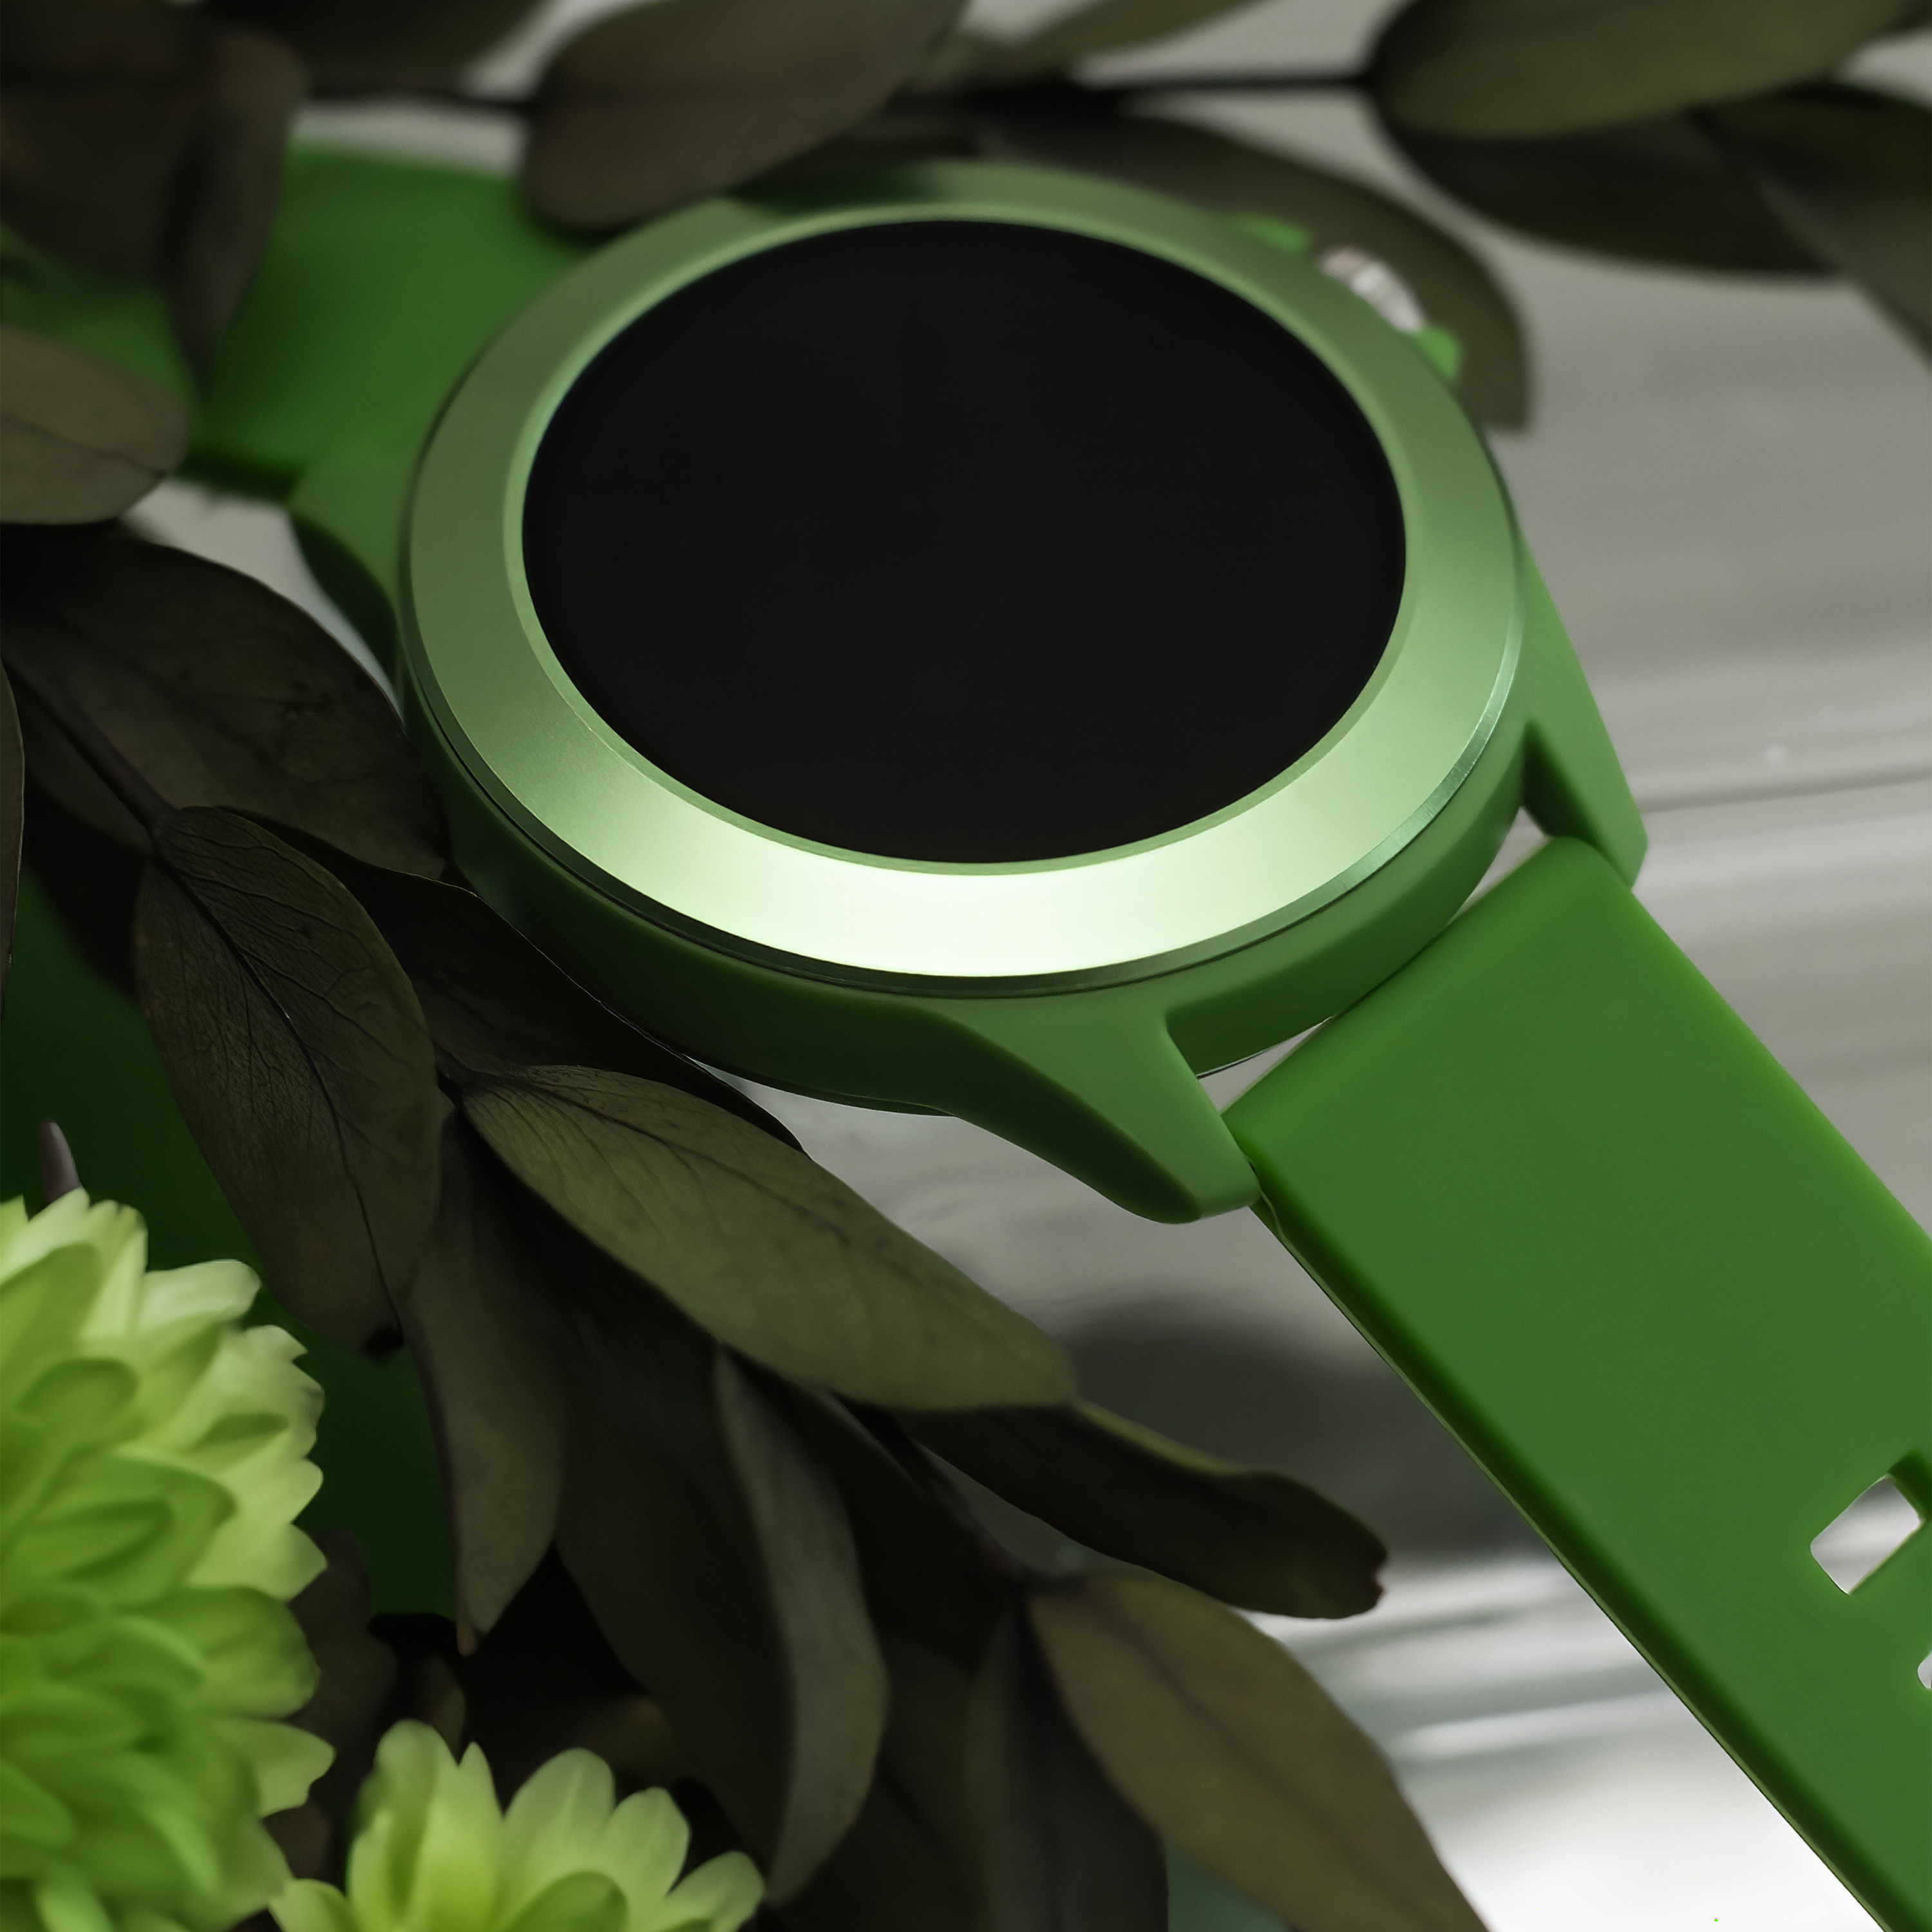 Smartwatch Forever Colorum Cw-300  MKP